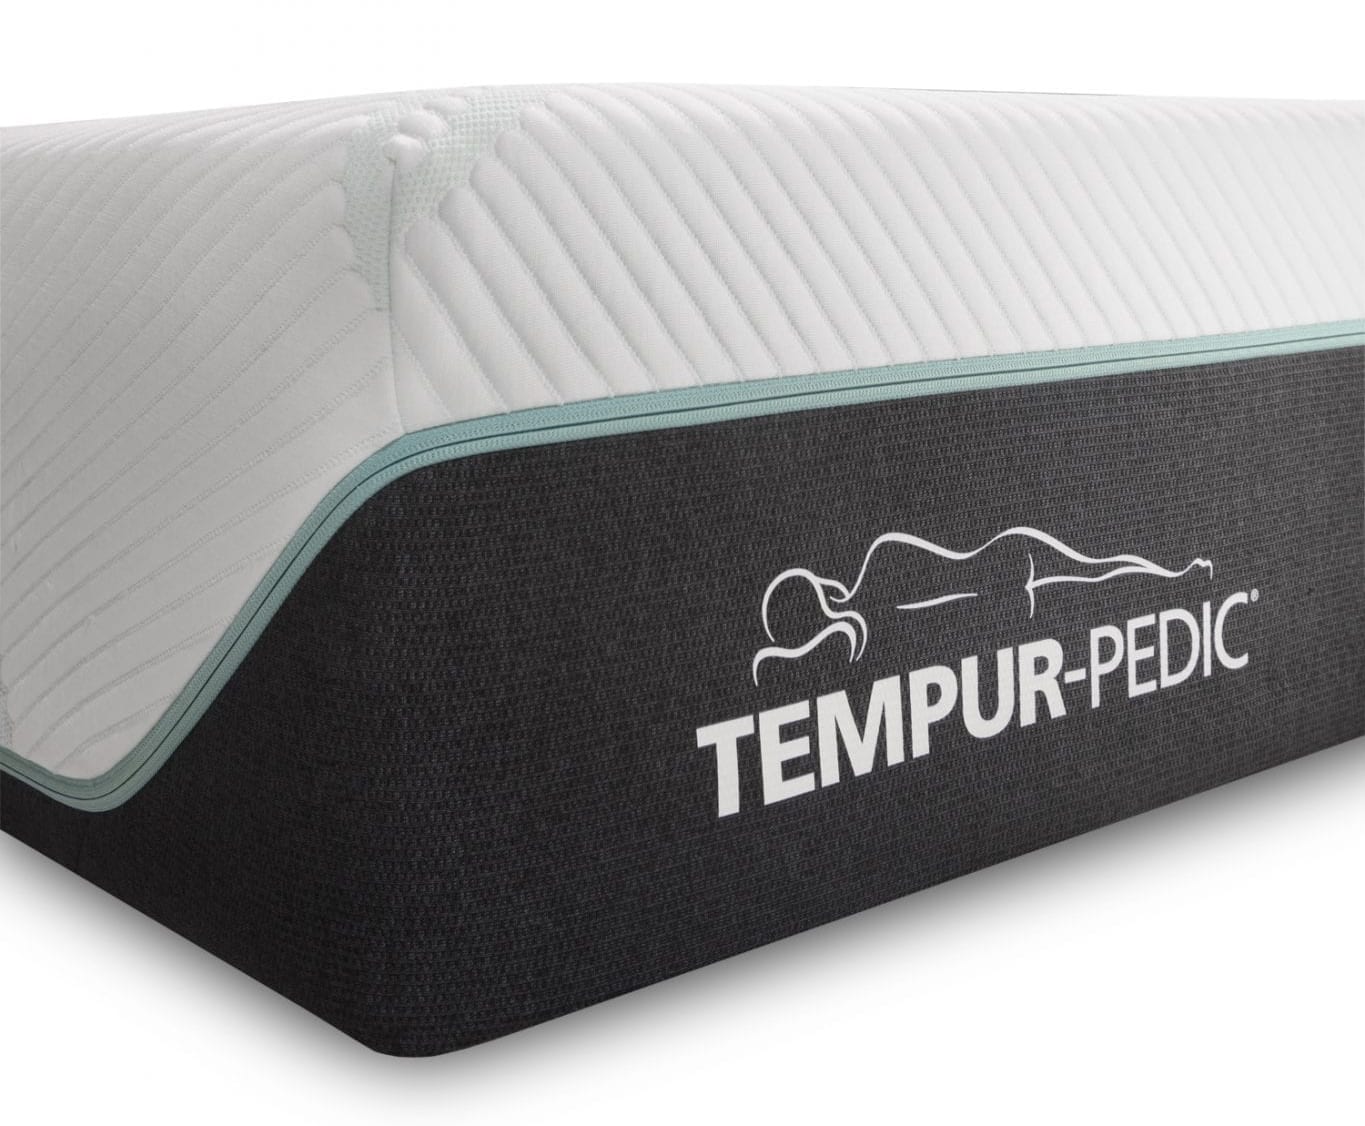 Tempur-Pedic Logo embroidered on the corner of the mattress